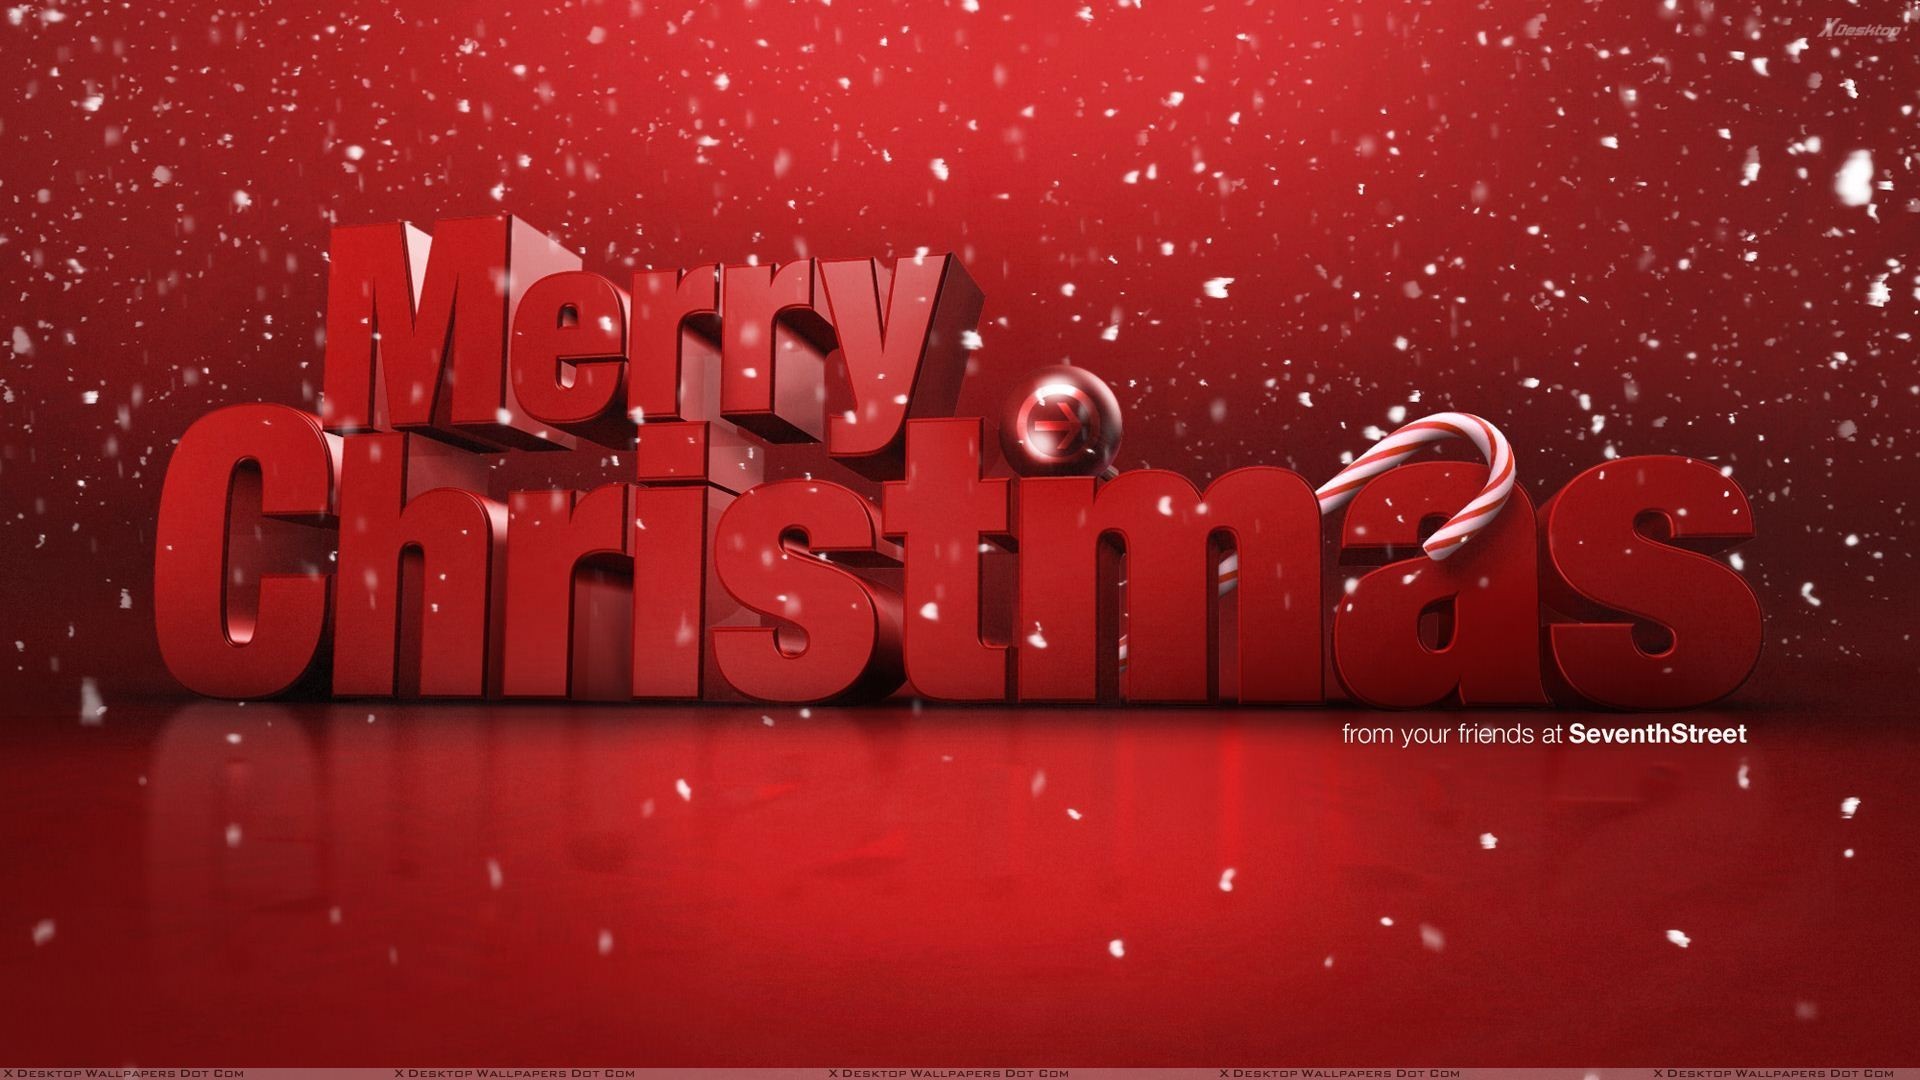 1920x1080  Red Christmas Backgrounds 10004 Hd Wallpapers in Celebrations .